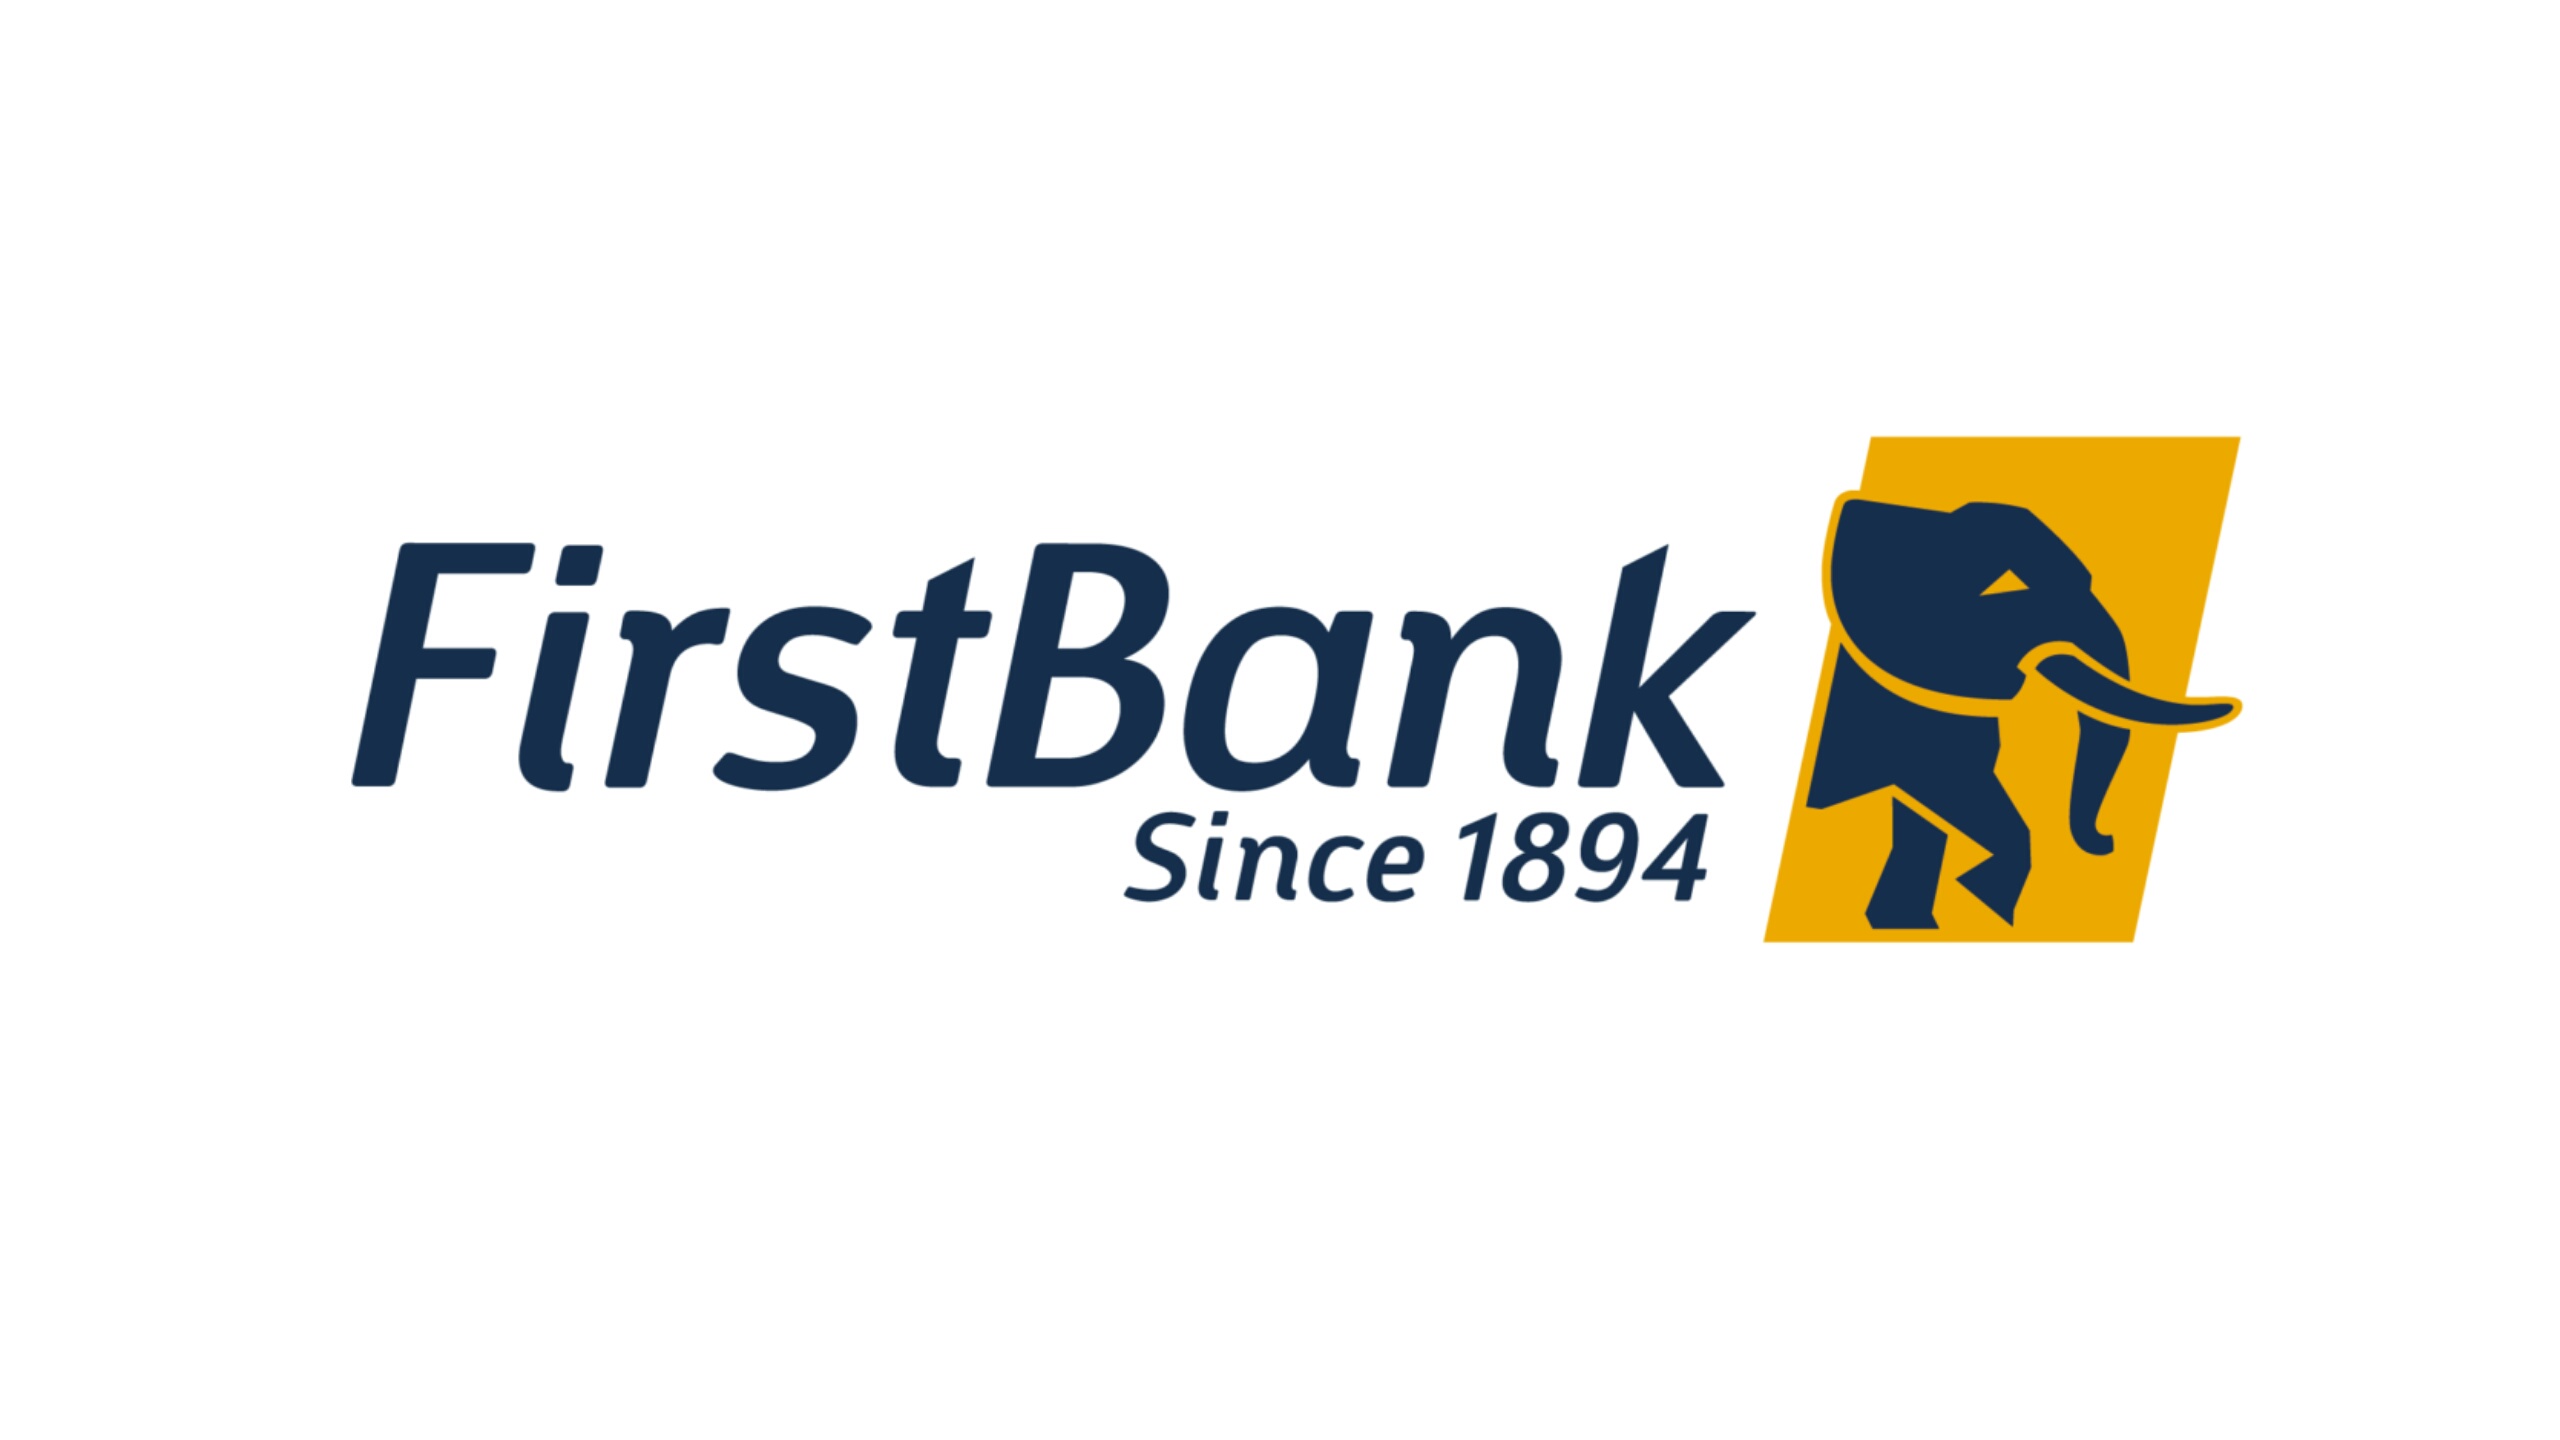 First Bank of Nigeria Limited Job Recruitment